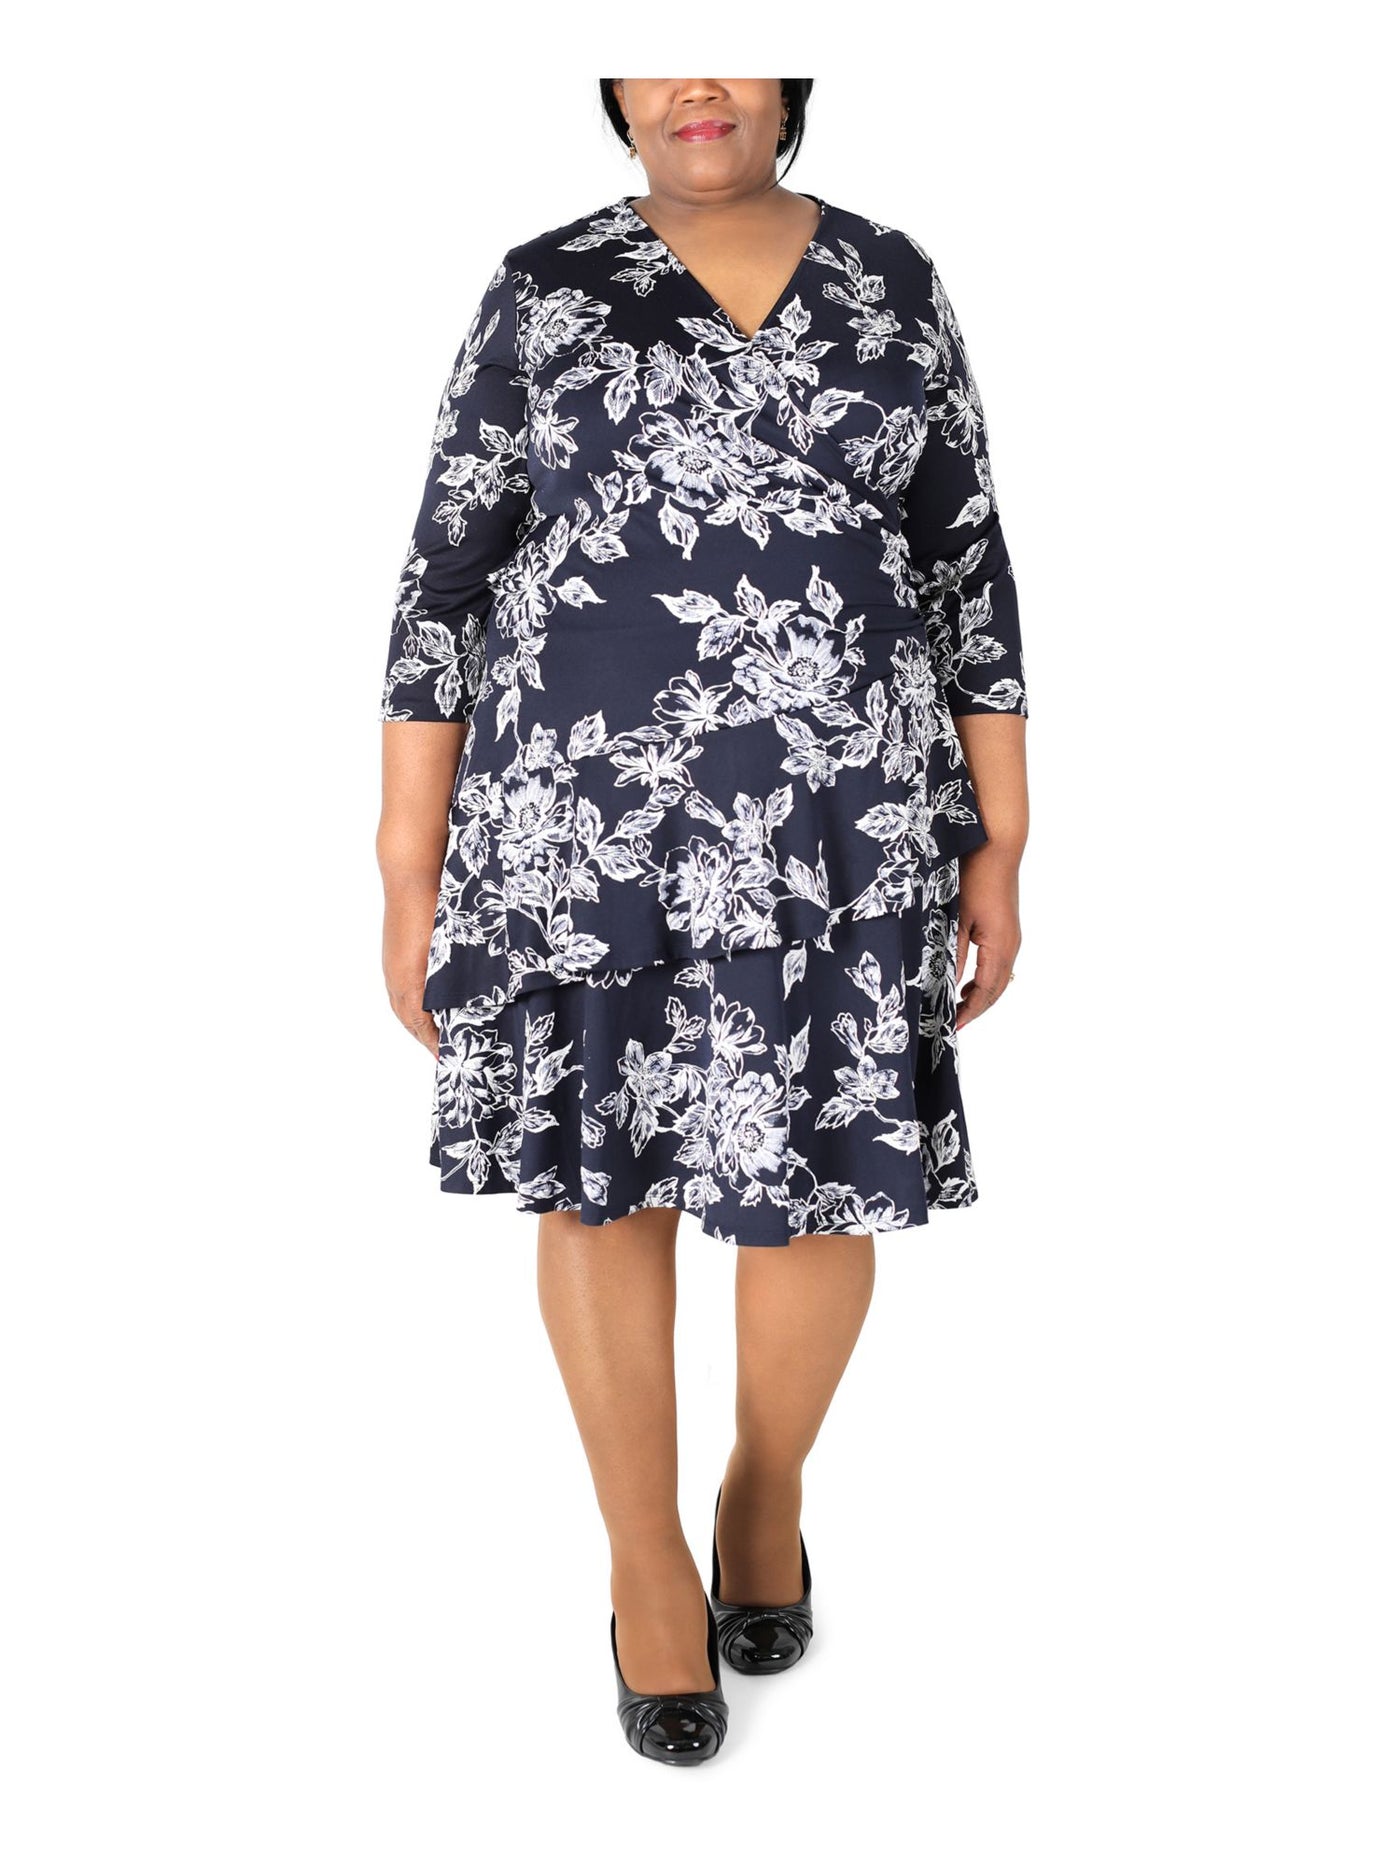 SIGNATURE BY ROBBIE BEE Womens Navy Gathered Ruffled Tiered Floral 3/4 Sleeve Surplice Neckline Below The Knee Wear To Work Fit + Flare Dress Plus 1X